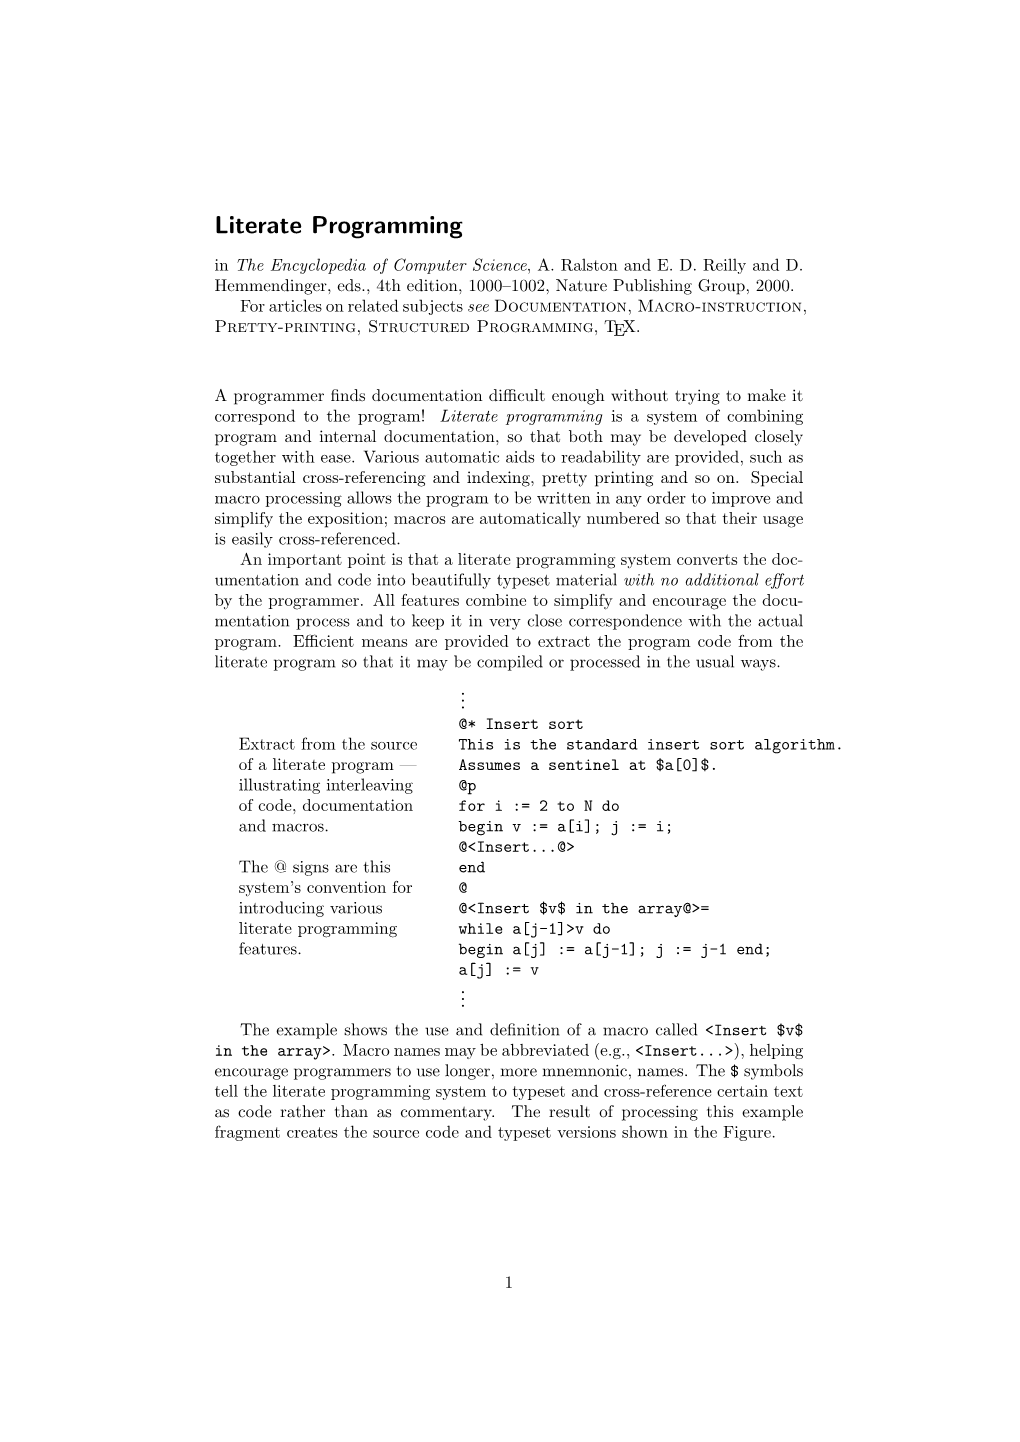 Literate Programming in the Encyclopedia of Computer Science, A